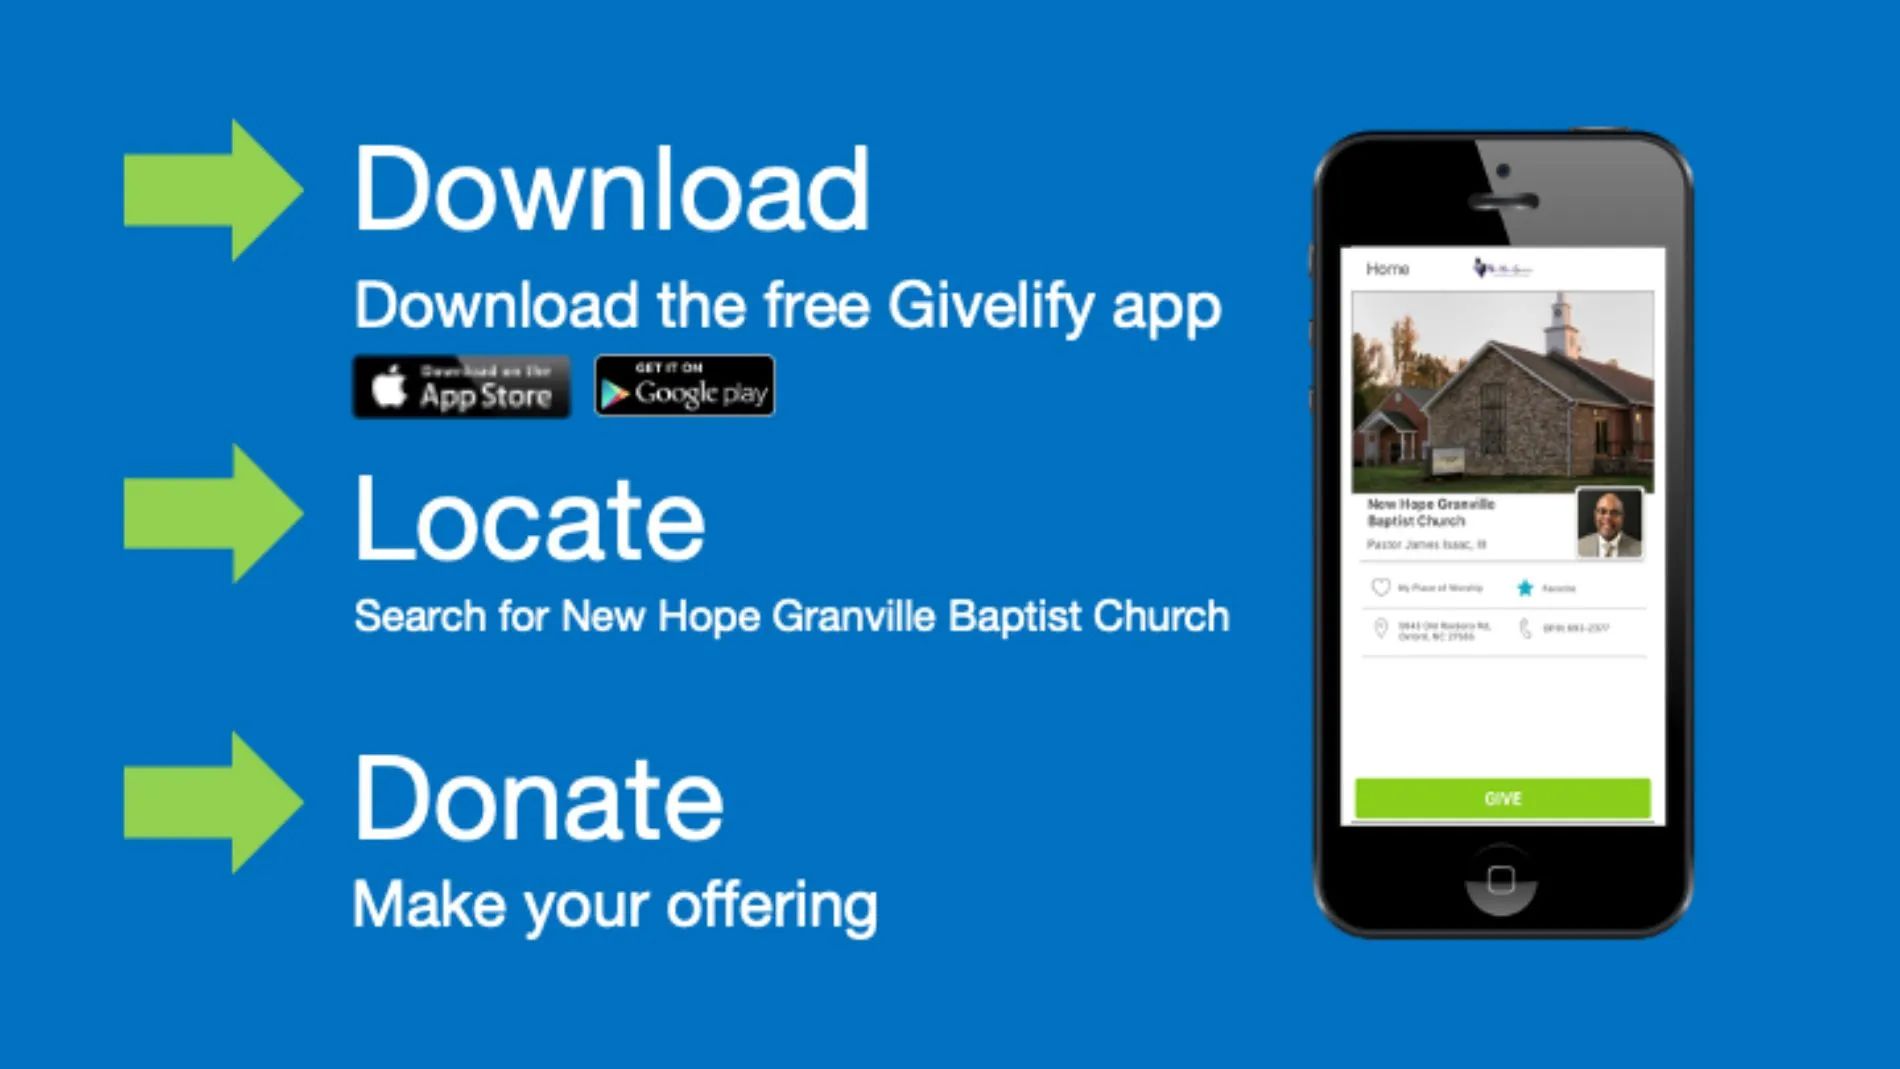 Download Givelify — Oxford, NC — New Hope Granville Missionary Baptist Church